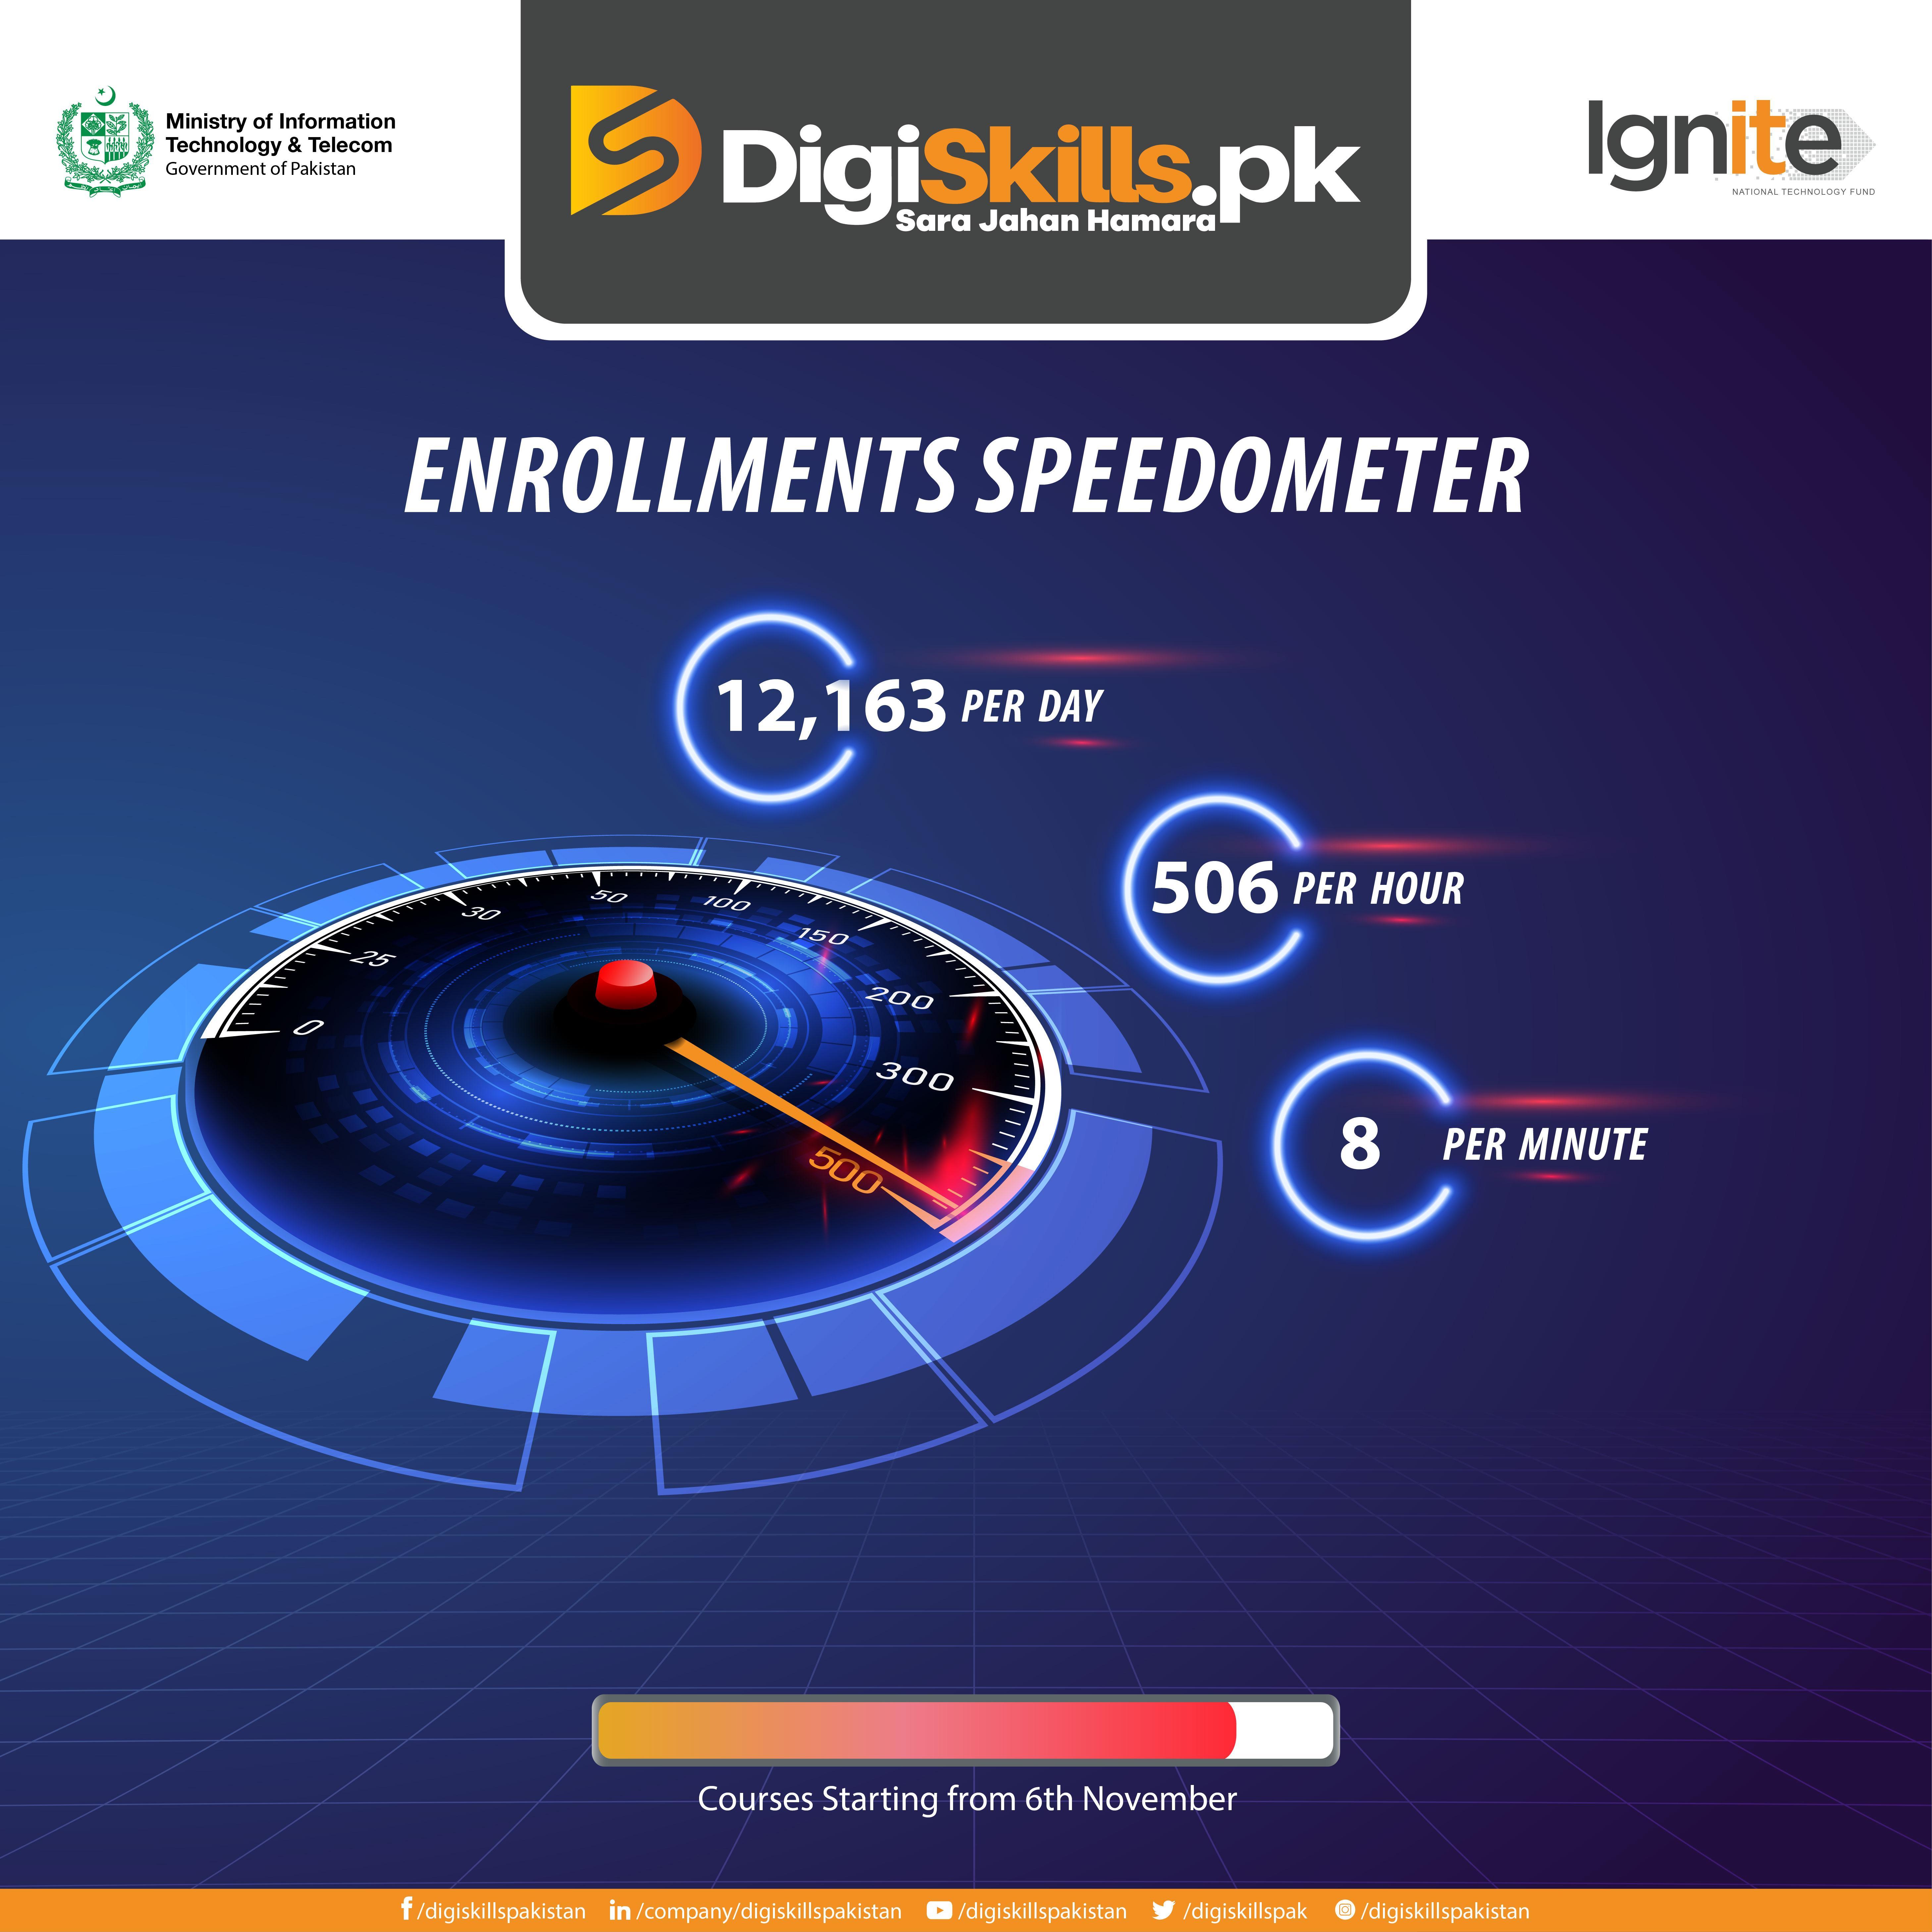 DIGISKILLS continues its legacyof Success by overachieving its enrollments